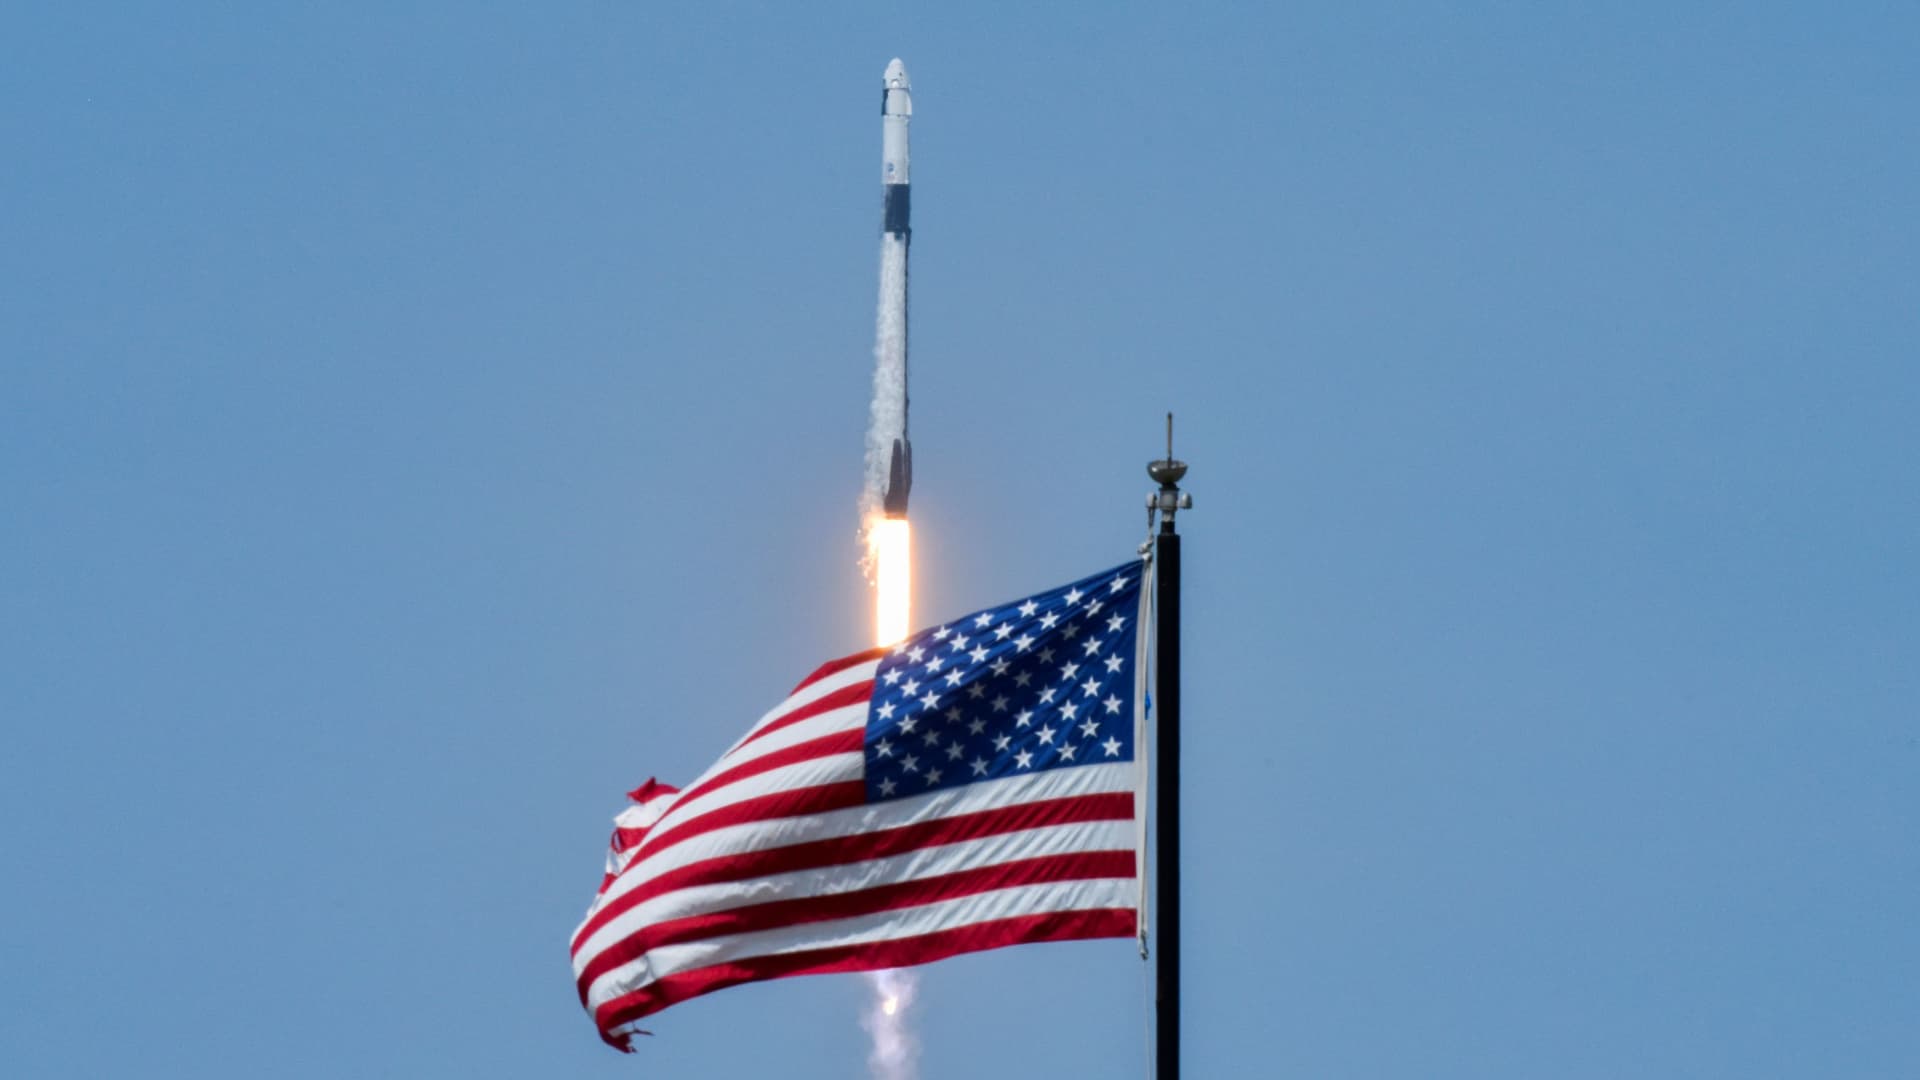 An American flag is seen as SpaceX Falcon 9 rocket and Crew Dragon spacecraft carrying NASA astronauts Douglas Hurley and Robert Behnken lifts off during NASA's SpaceX Demo-2 mission to the International Space Station from NASA's Kennedy Space Center in Cape Canaveral, Florida, U.S. May 30, 2020.